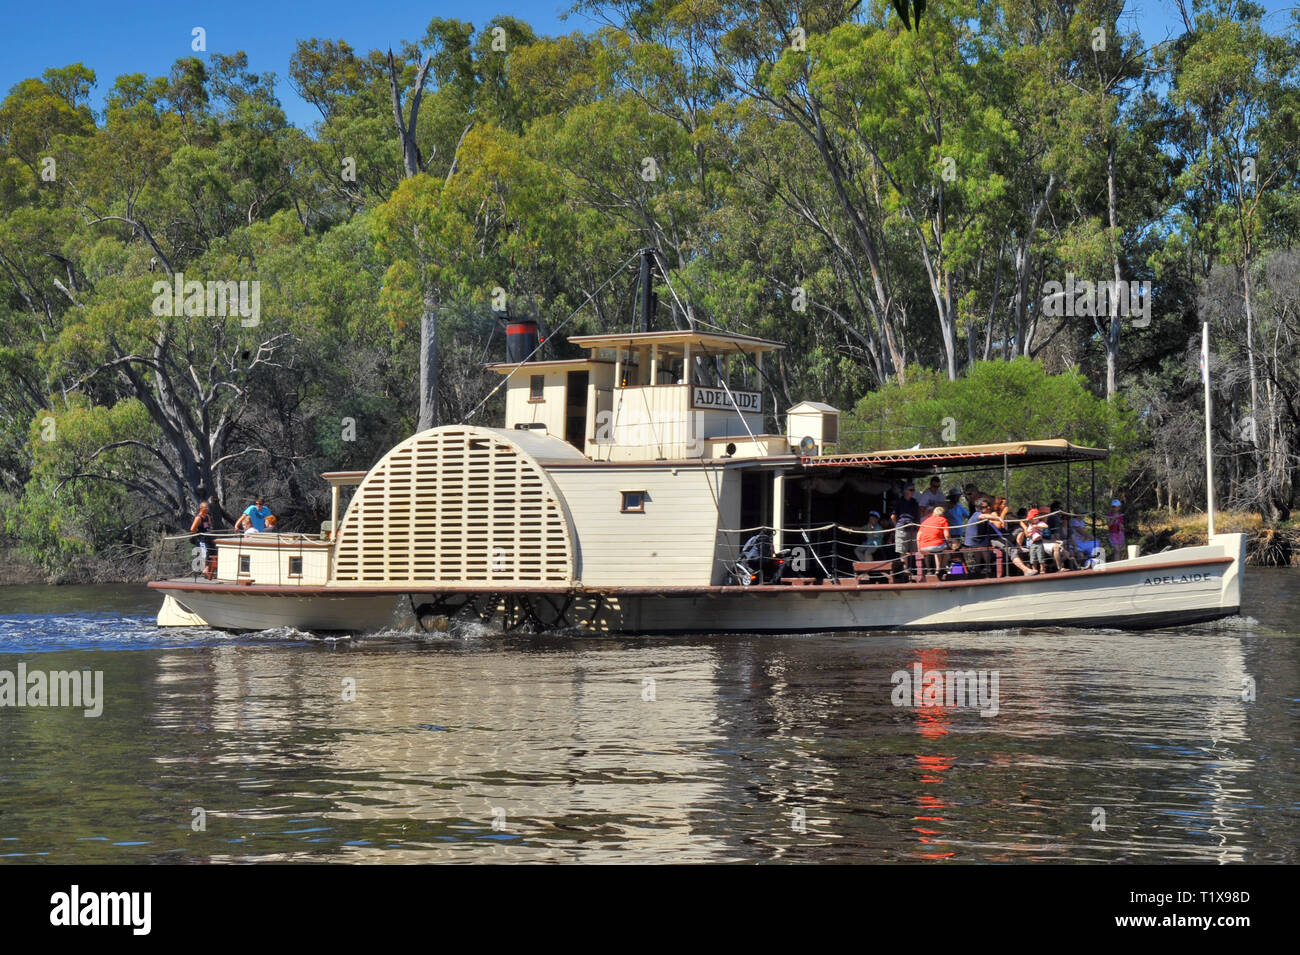 Restored paddle steamer 'Adelaide' on the Adelaide River in South Australia. Passengers on deck, Eucalyptus trees at rivers edge. Stock Photo